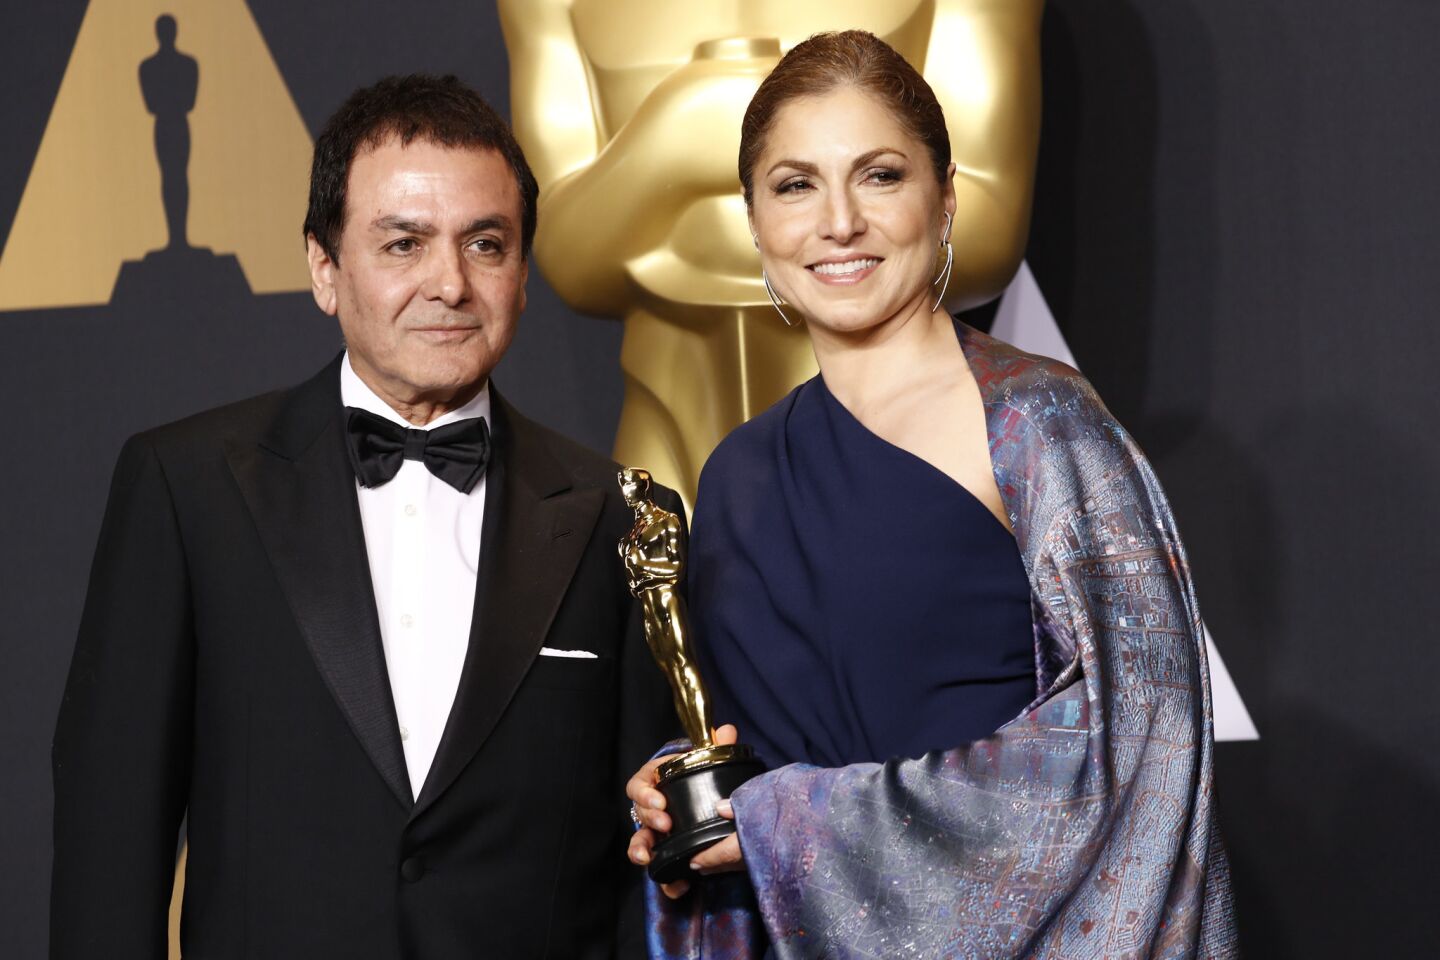 Engineer and astronaut Anousheh Ansari, right, and former NASA scientist Firouz Naderi with the award for best foreign language film for "The Salesman." They accepted on behalf of director Asghar Farhadi.